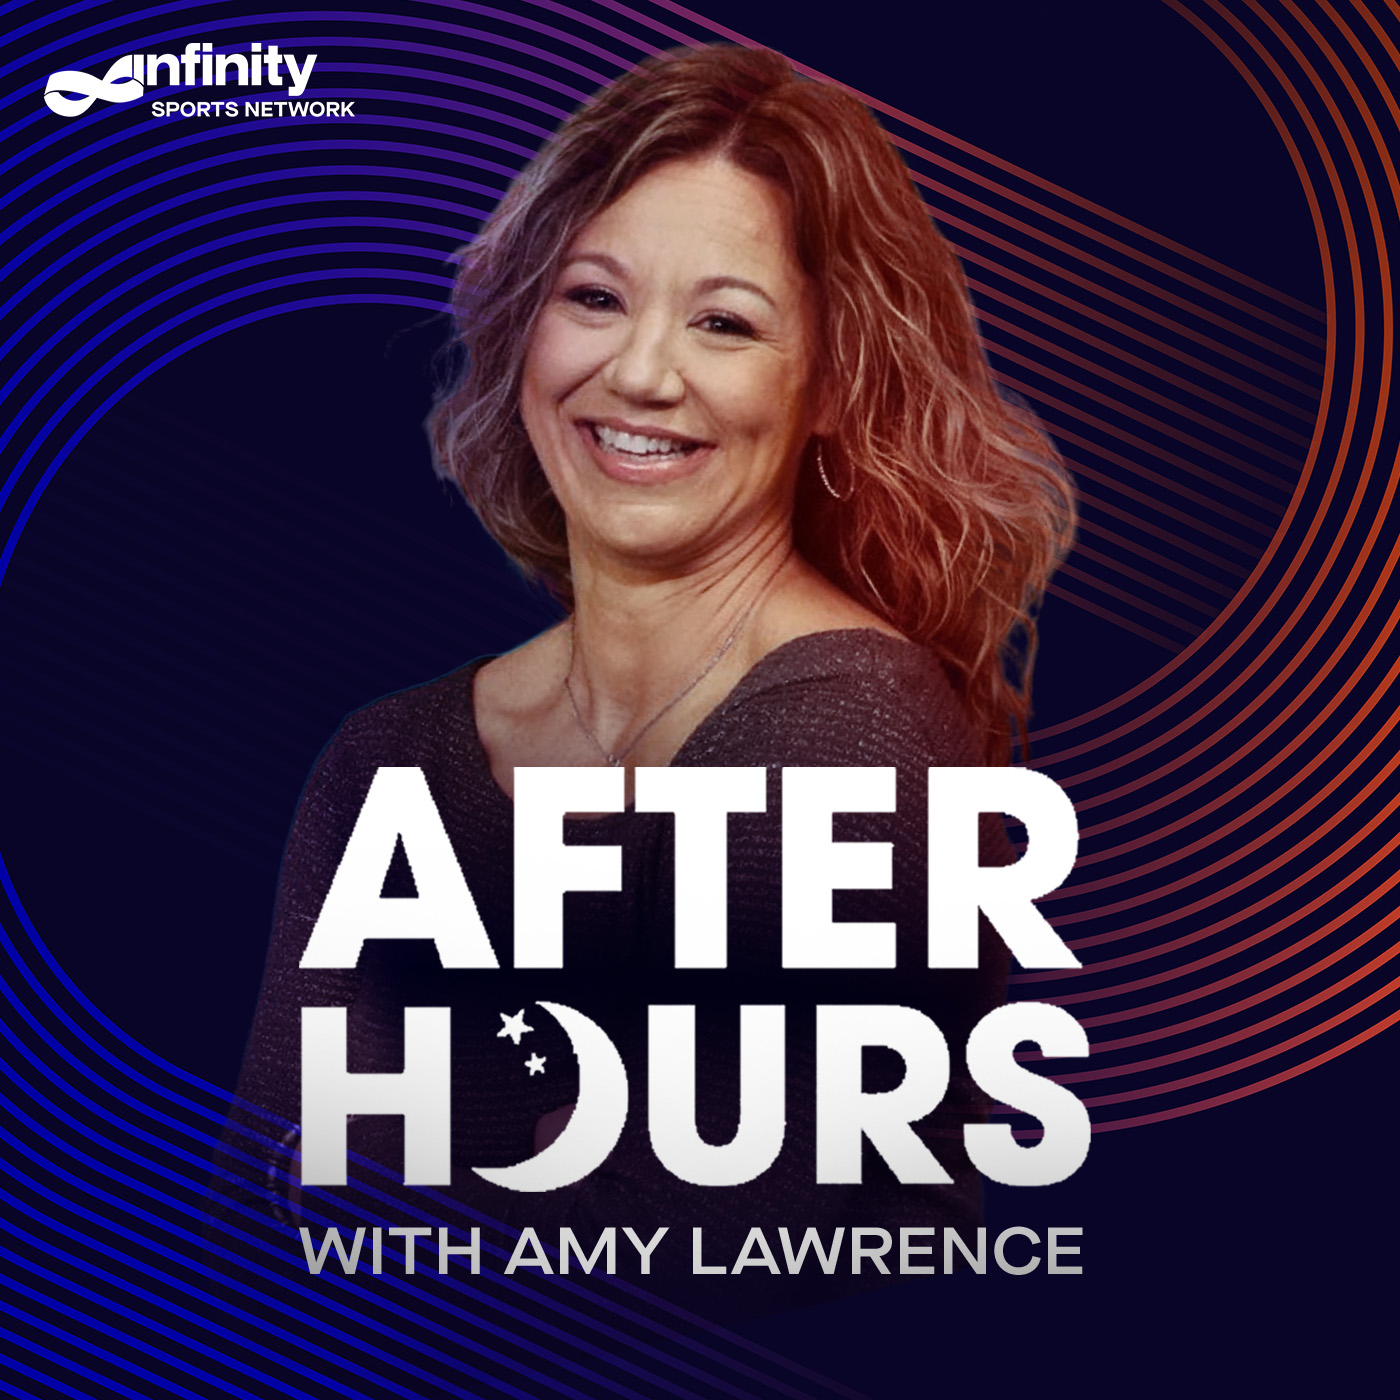 10-13-21 After Hours with Amy Lawrence PODCAST: Hour 4